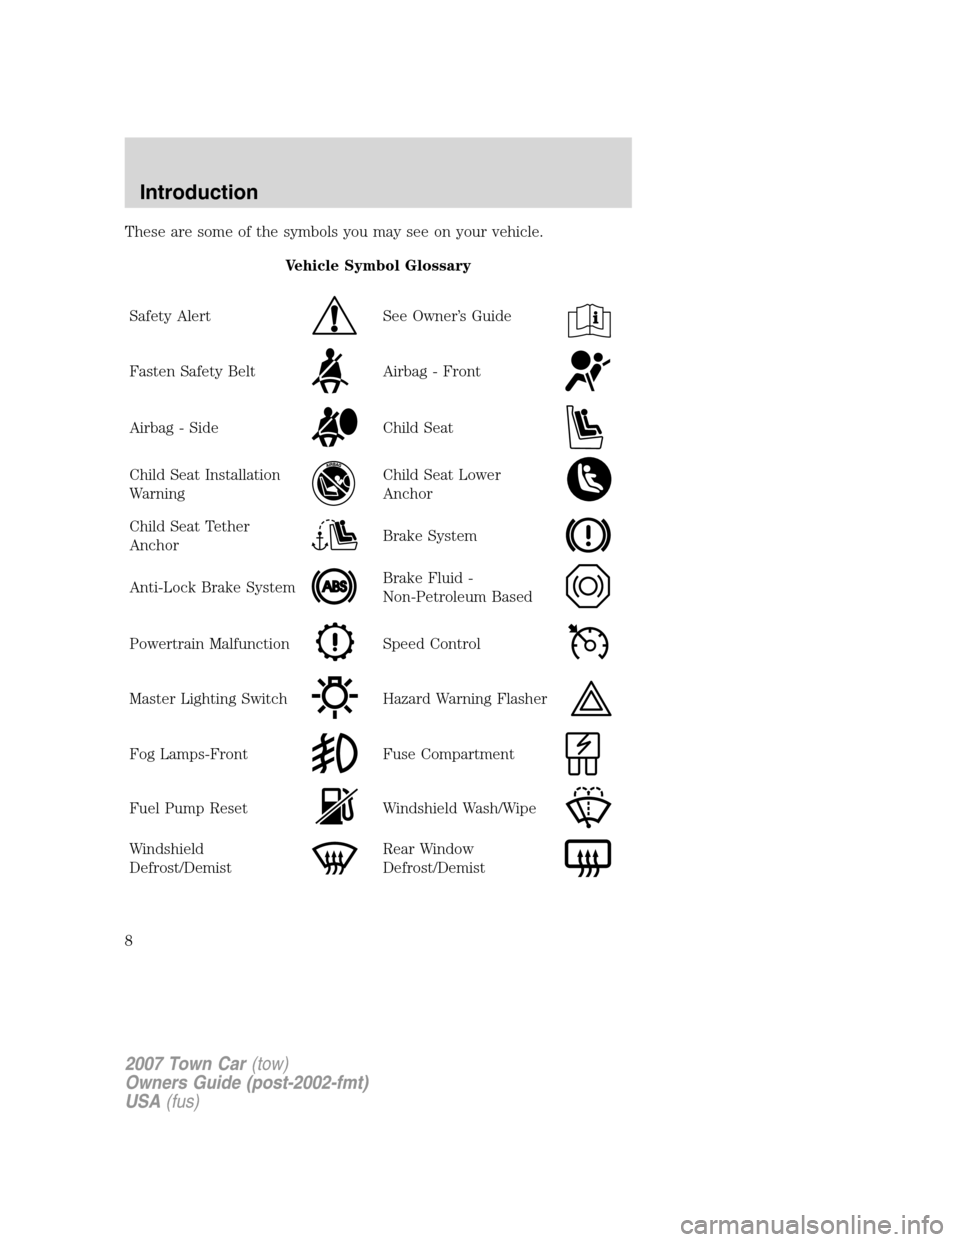 LINCOLN TOWN CAR 2007  Owners Manual These are some of the symbols you may see on your vehicle.
Vehicle Symbol Glossary
Safety Alert
See Owner’s Guide
Fasten Safety BeltAirbag - Front
Airbag - SideChild Seat
Child Seat Installation
War